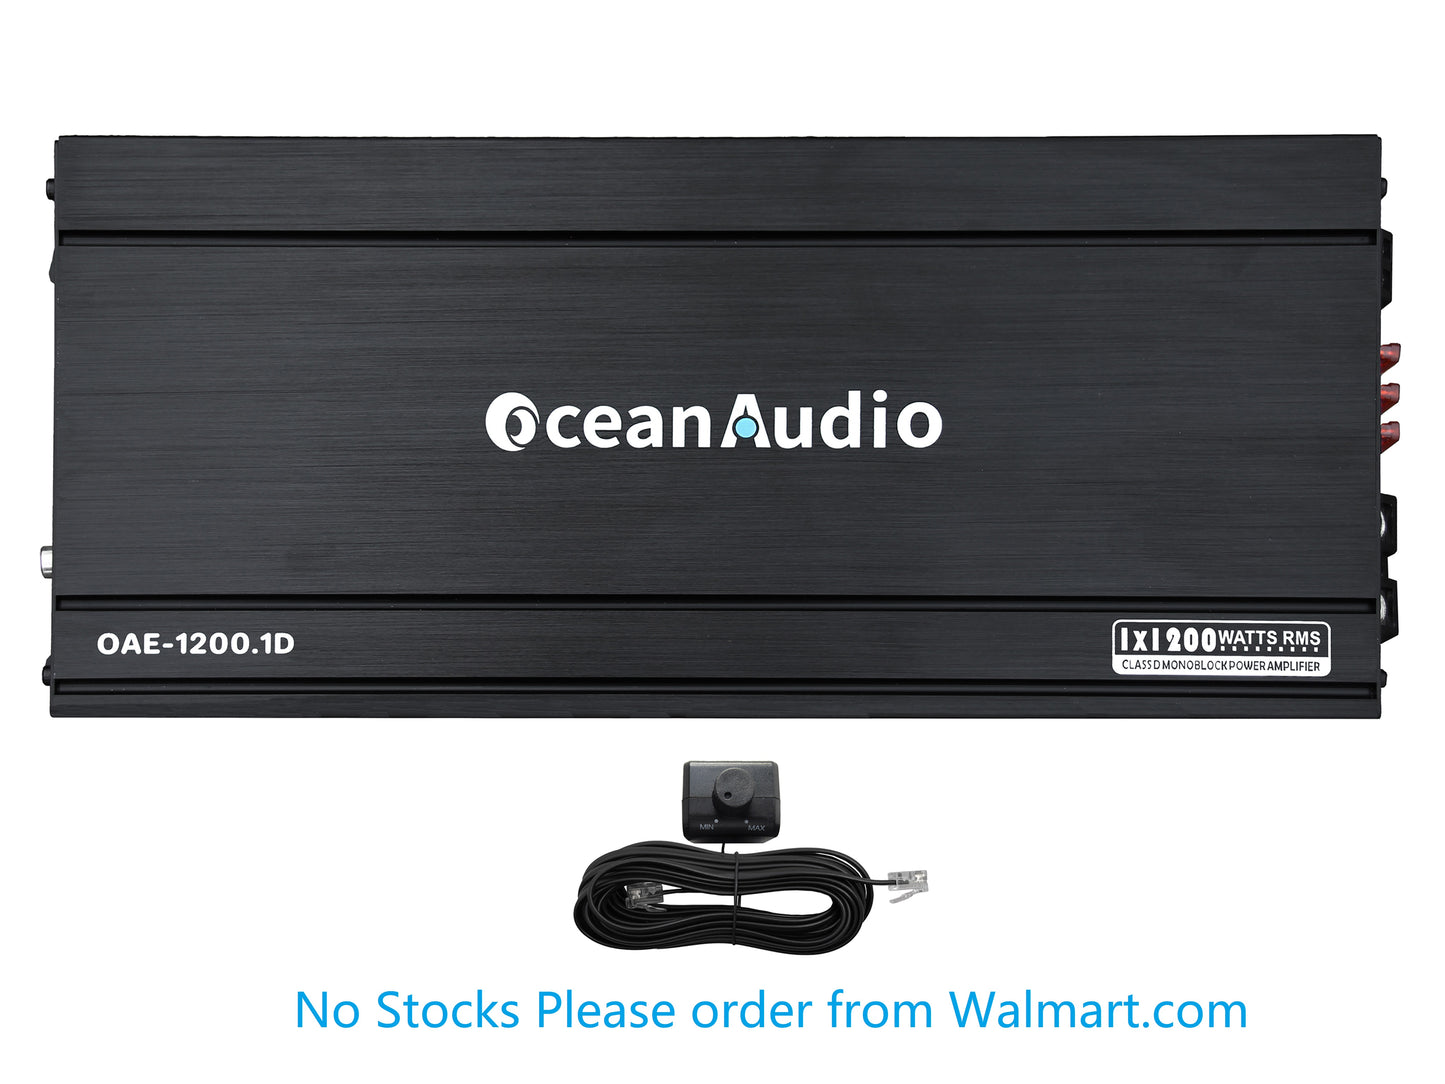 OceanAudio OAE-1200.1D Monoblock Class D Amplifier with Remote Subwoofer Level Control, 2400W - RMS Power @4Ω 1*480W @2Ω 1*800W @1Ω 1*1200W Max Power @1Ω 1*2400W (*** No Stocks Please order from Walmart.com ***)